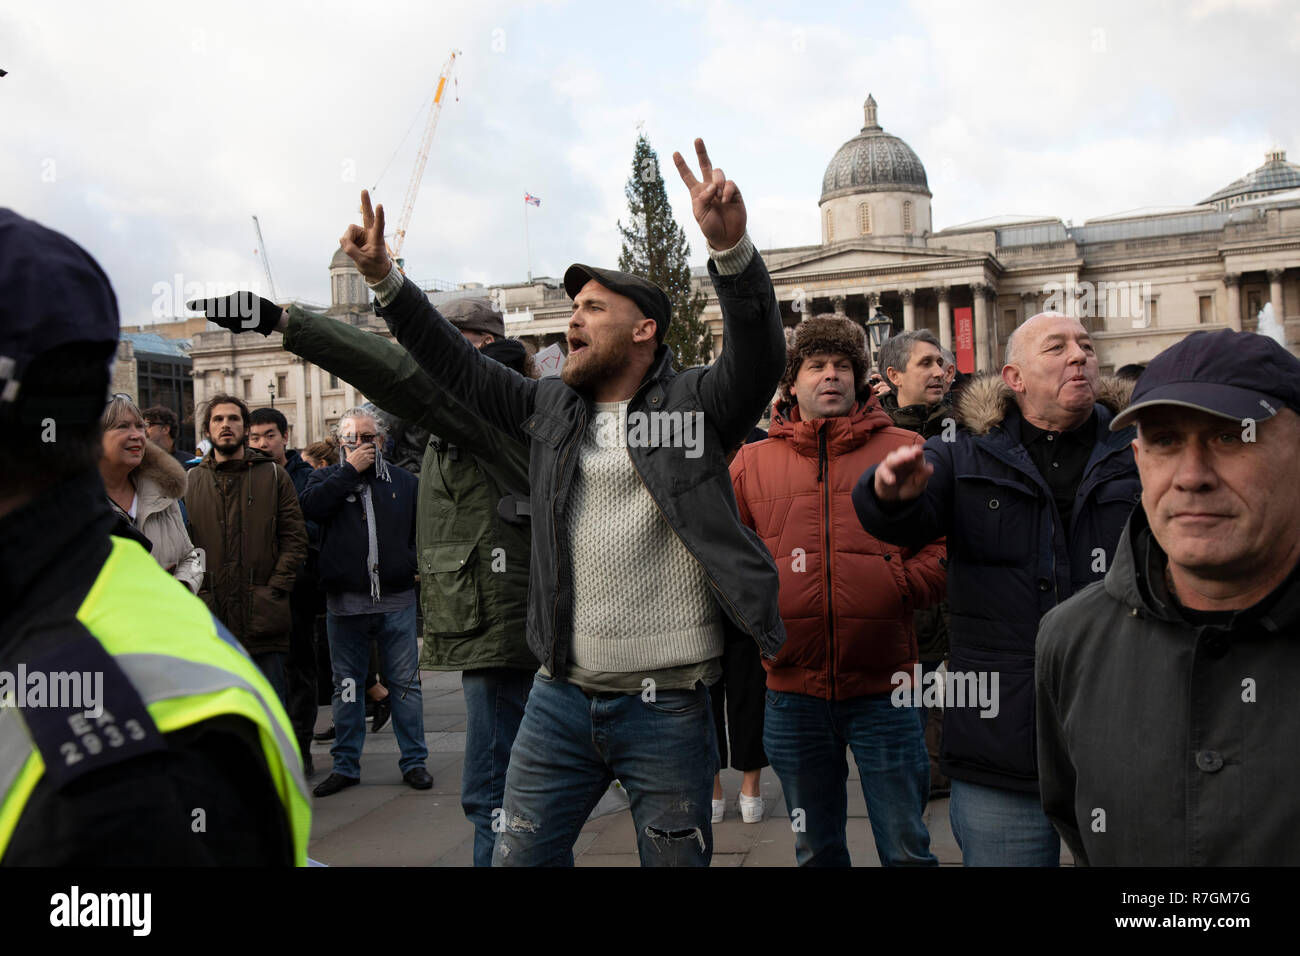 Demonstrators on the opposing side of the arguement at the ‘Oppose Tommy Robinson, unite against racism & fascism’ counter demonstration organised for anti-fascist groups opposed to far right politics, regardless of their positions on leave/remain on Brexit on 9th December 2018 in London, United Kingdom. Stock Photo